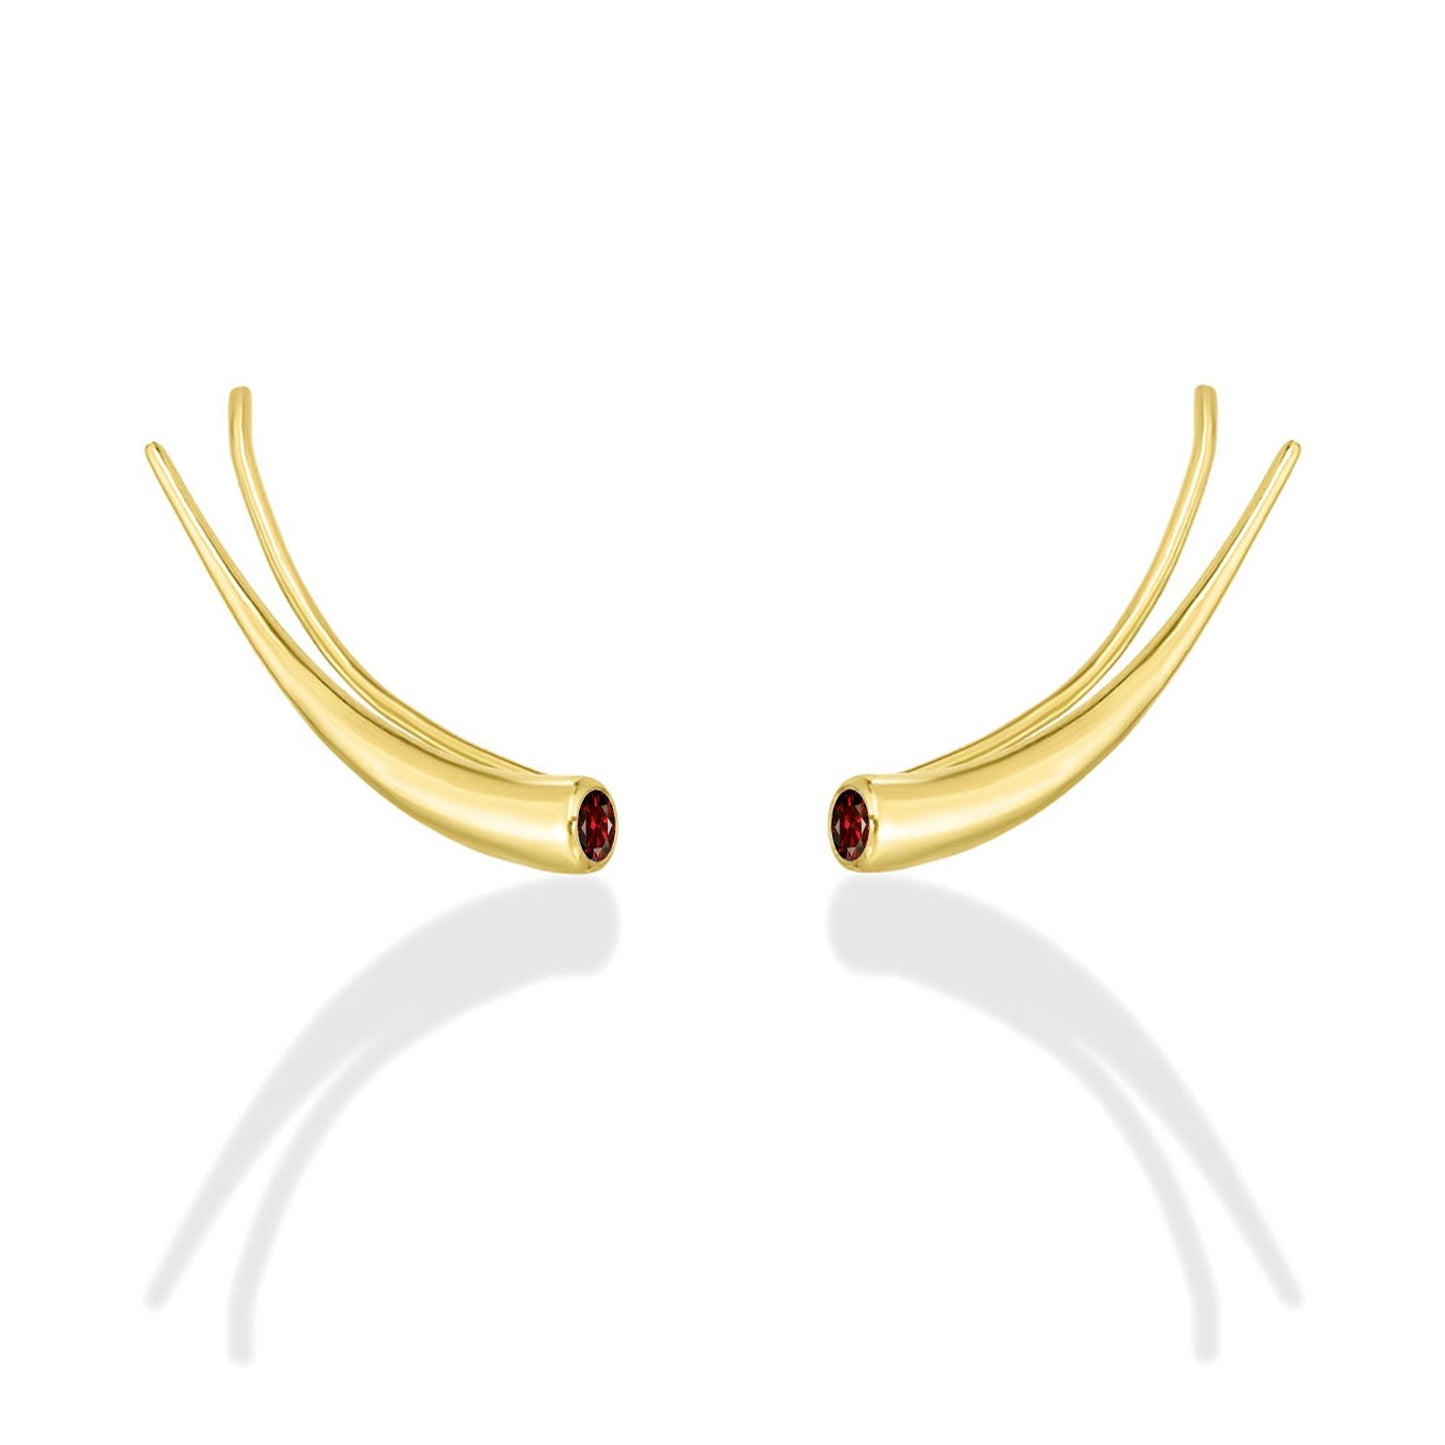 14k gold Curved Quill Climber Earrings with garnet